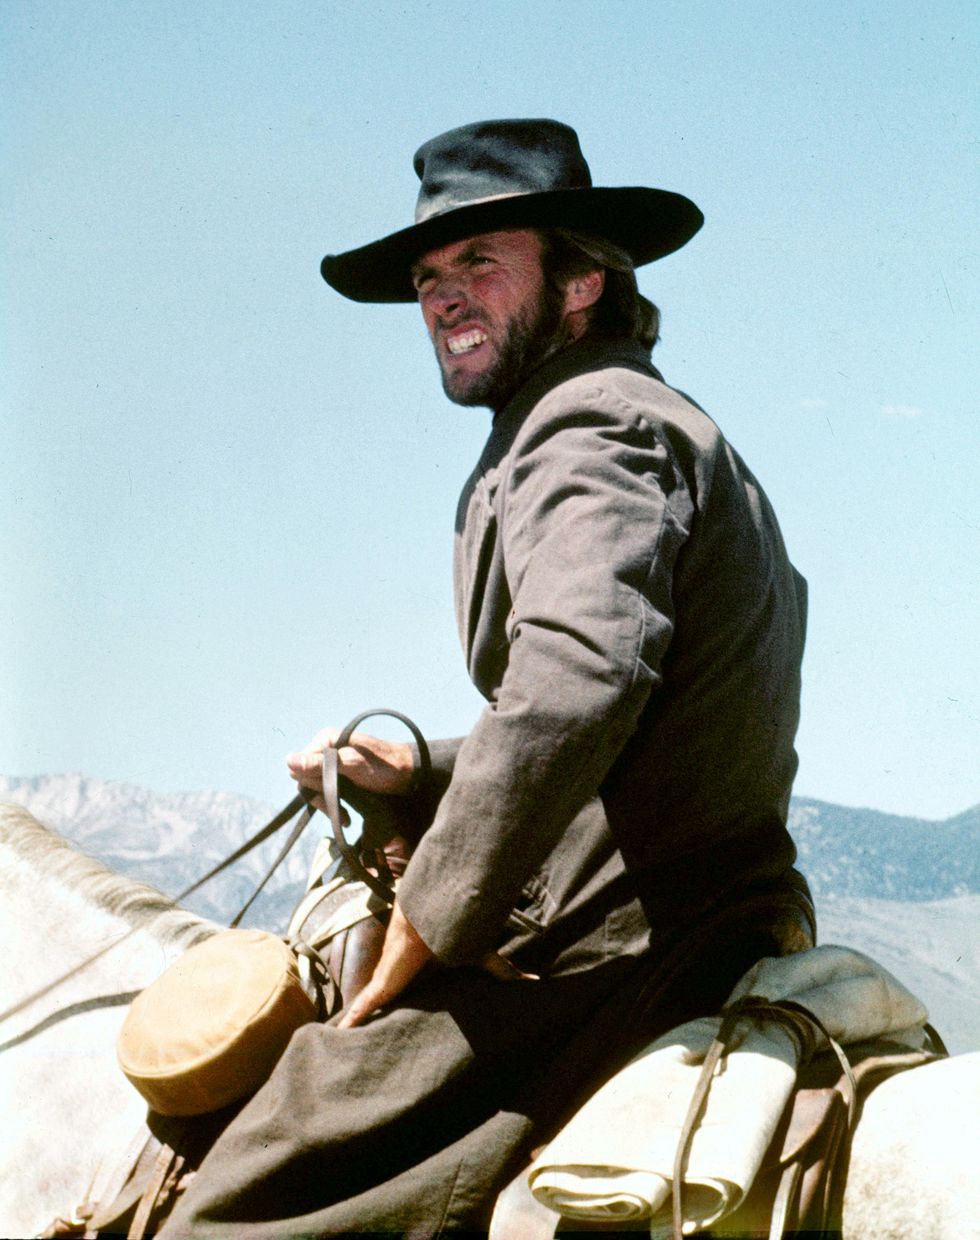 editorial use only no book cover usage
mandatory credit photo by universalkobalshutterstock 5881972m
clint eastwood
high plains drifter   1972
director clint eastwood
universal
usa
scene still
western
lhomme des hautes plaine